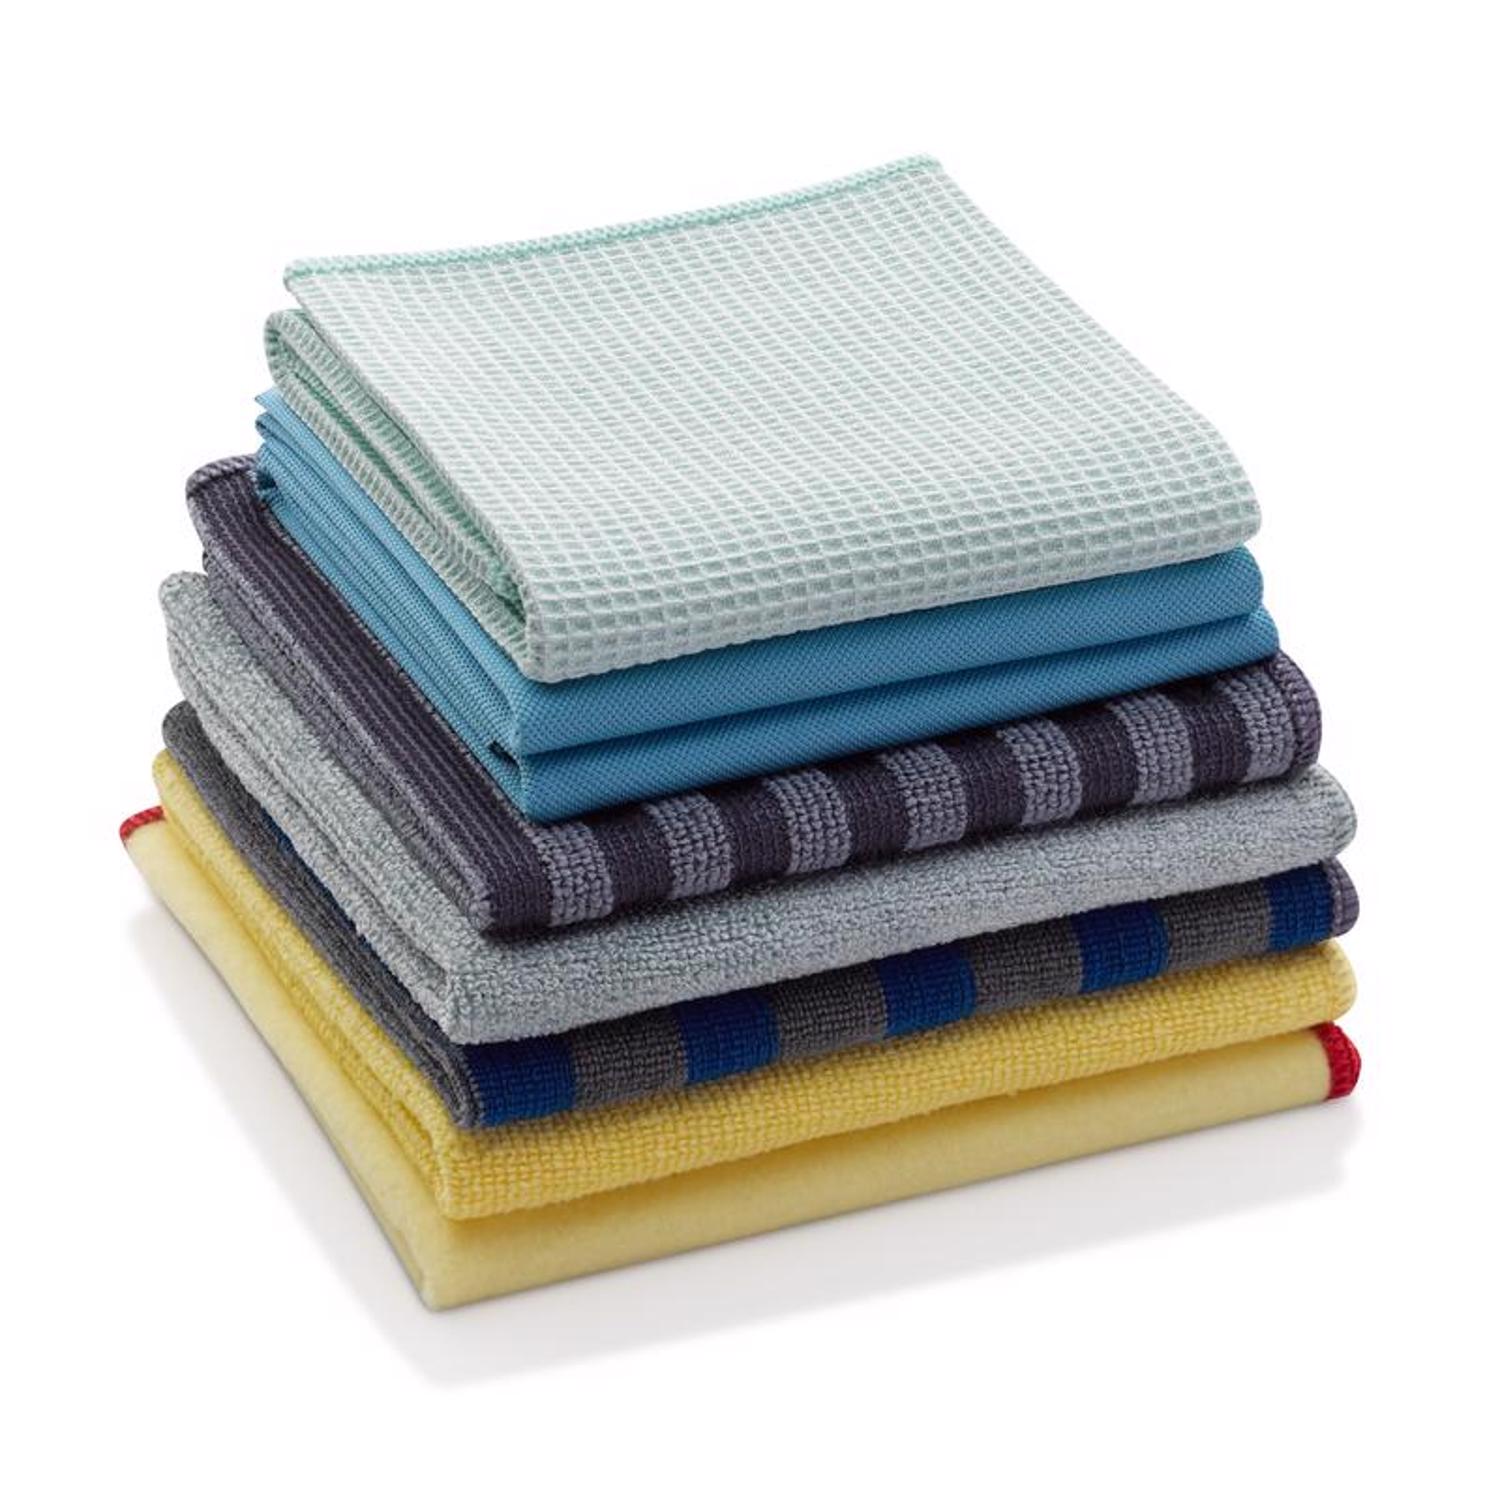 E-Cloth Home Cleaning Microfiber Home Cleaning Set 8 pk